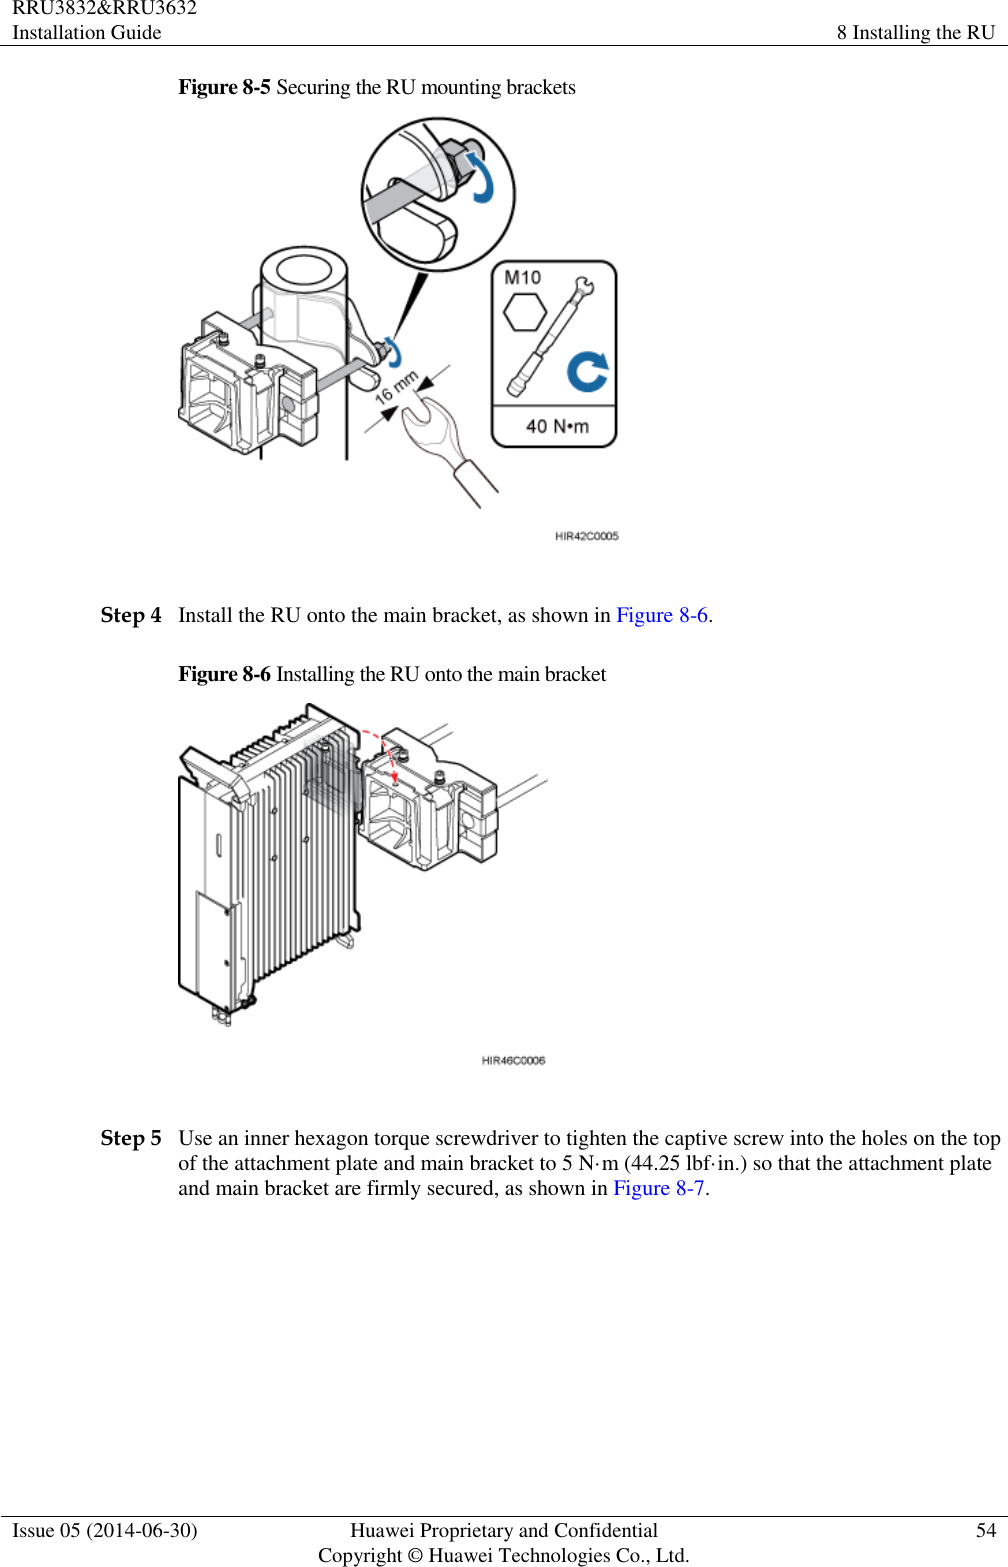 RRU3832&amp;RRU3632 Installation Guide 8 Installing the RU  Issue 05 (2014-06-30) Huawei Proprietary and Confidential                                     Copyright © Huawei Technologies Co., Ltd. 54  Figure 8-5 Securing the RU mounting brackets   Step 4 Install the RU onto the main bracket, as shown in Figure 8-6. Figure 8-6 Installing the RU onto the main bracket   Step 5 Use an inner hexagon torque screwdriver to tighten the captive screw into the holes on the top of the attachment plate and main bracket to 5 N·m (44.25 lbf·in.) so that the attachment plate and main bracket are firmly secured, as shown in Figure 8-7. 